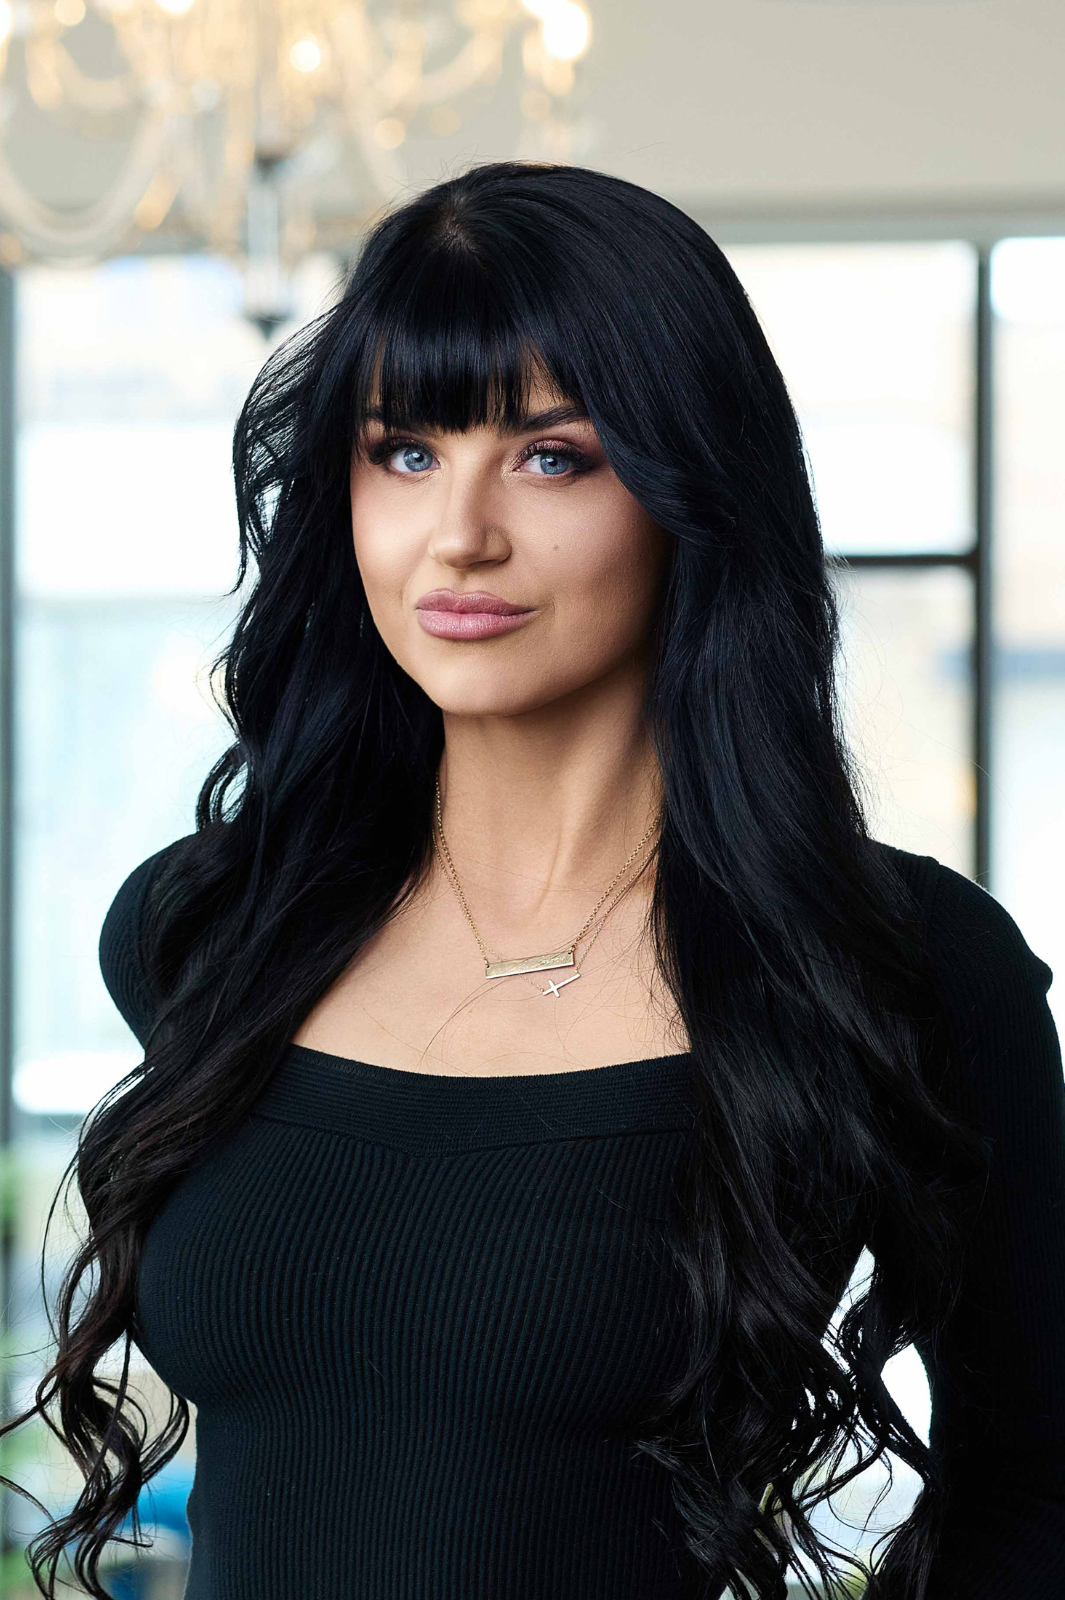 A woman with long black hair is wearing a black sweater and a necklace.